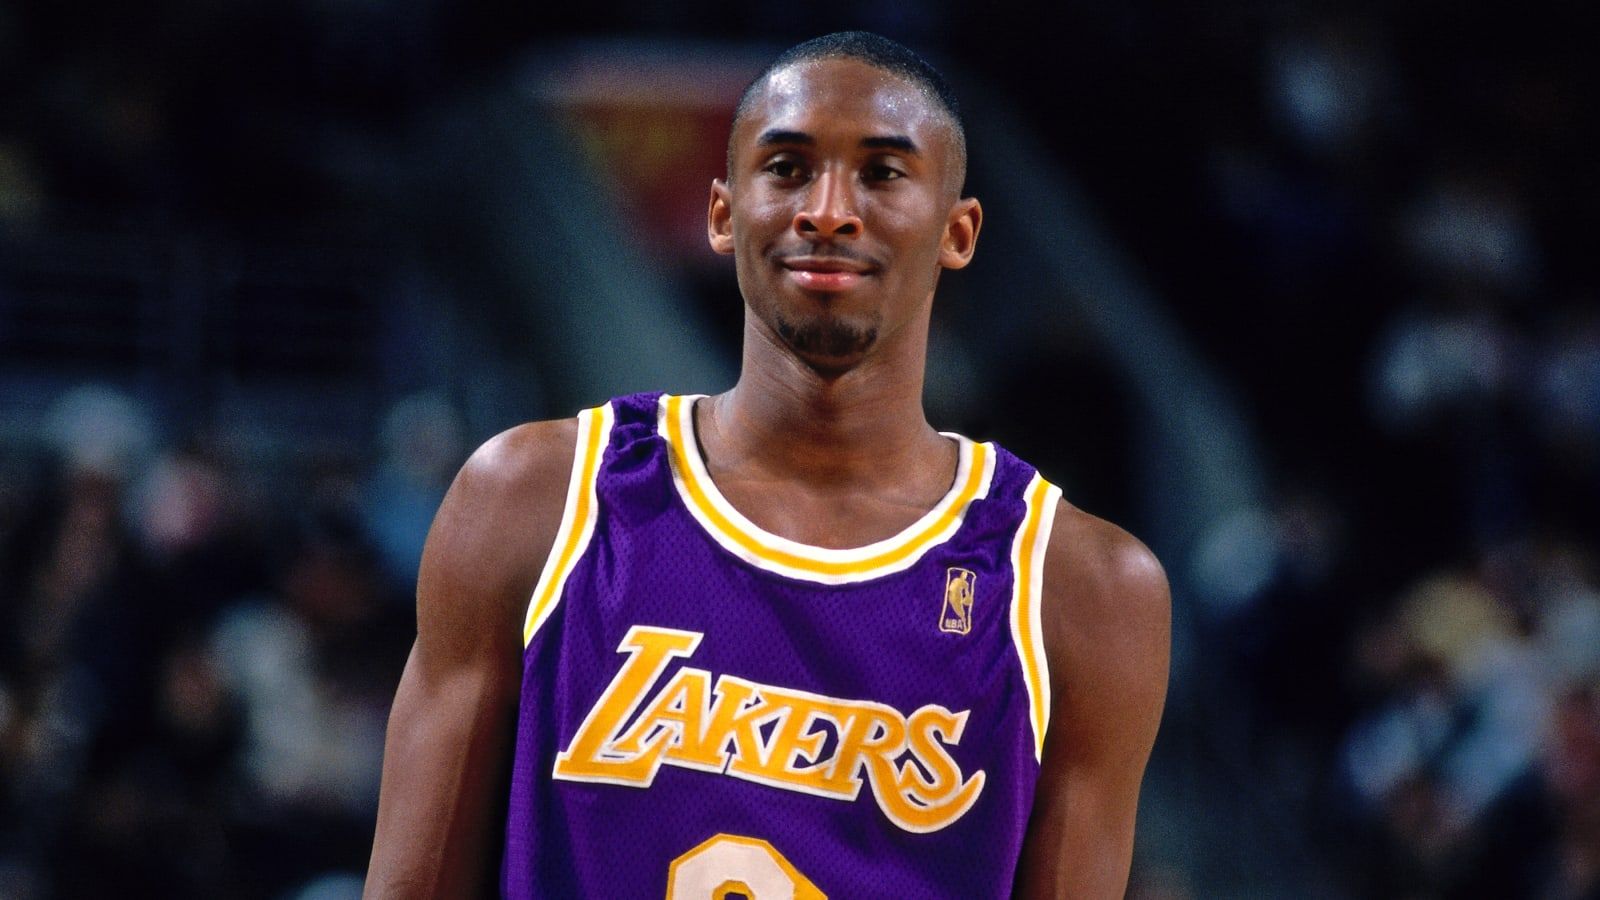 Kobe Bryant jersey auctioned off, starts at $000